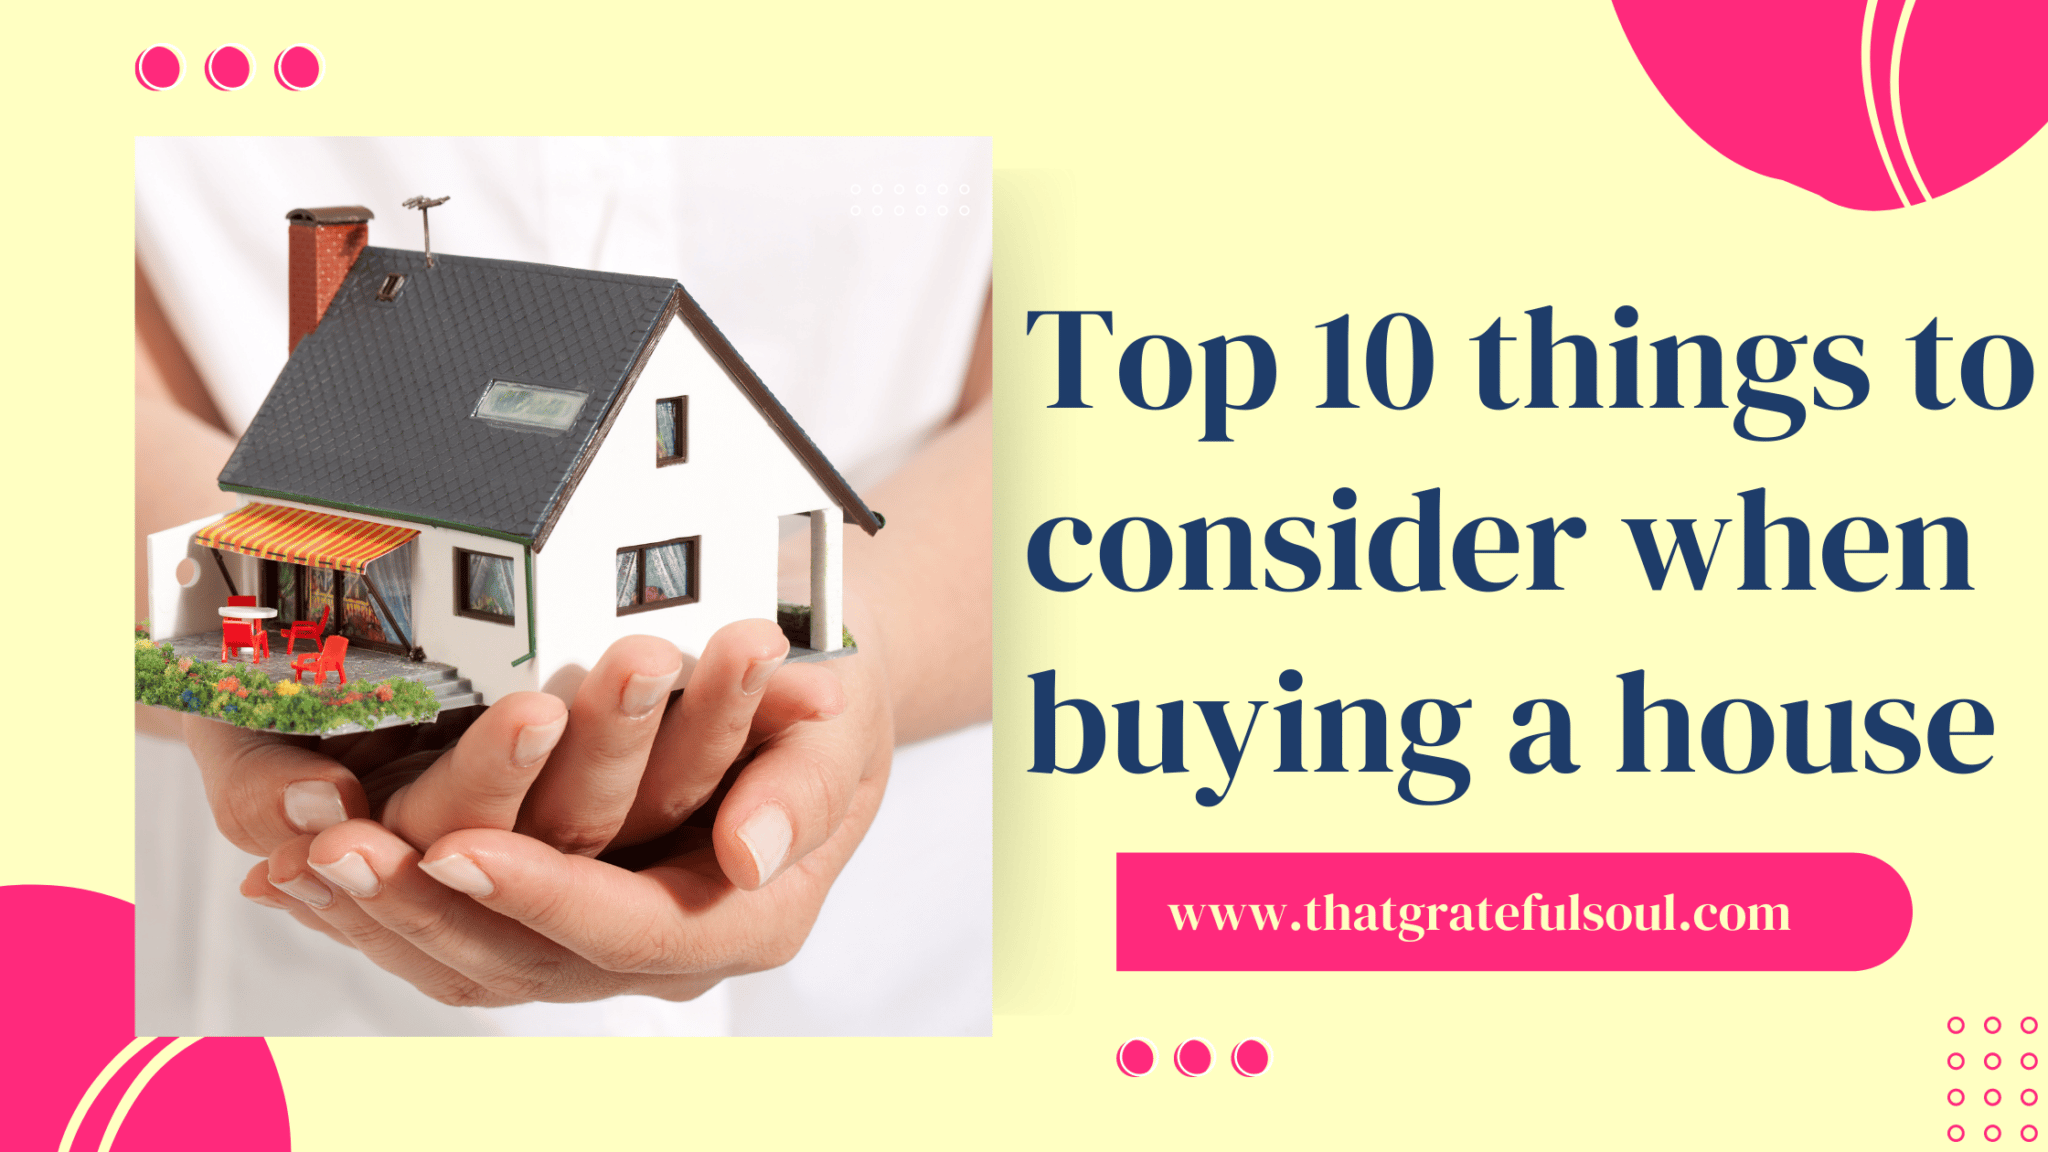 Top 10 things to consider when buying a house